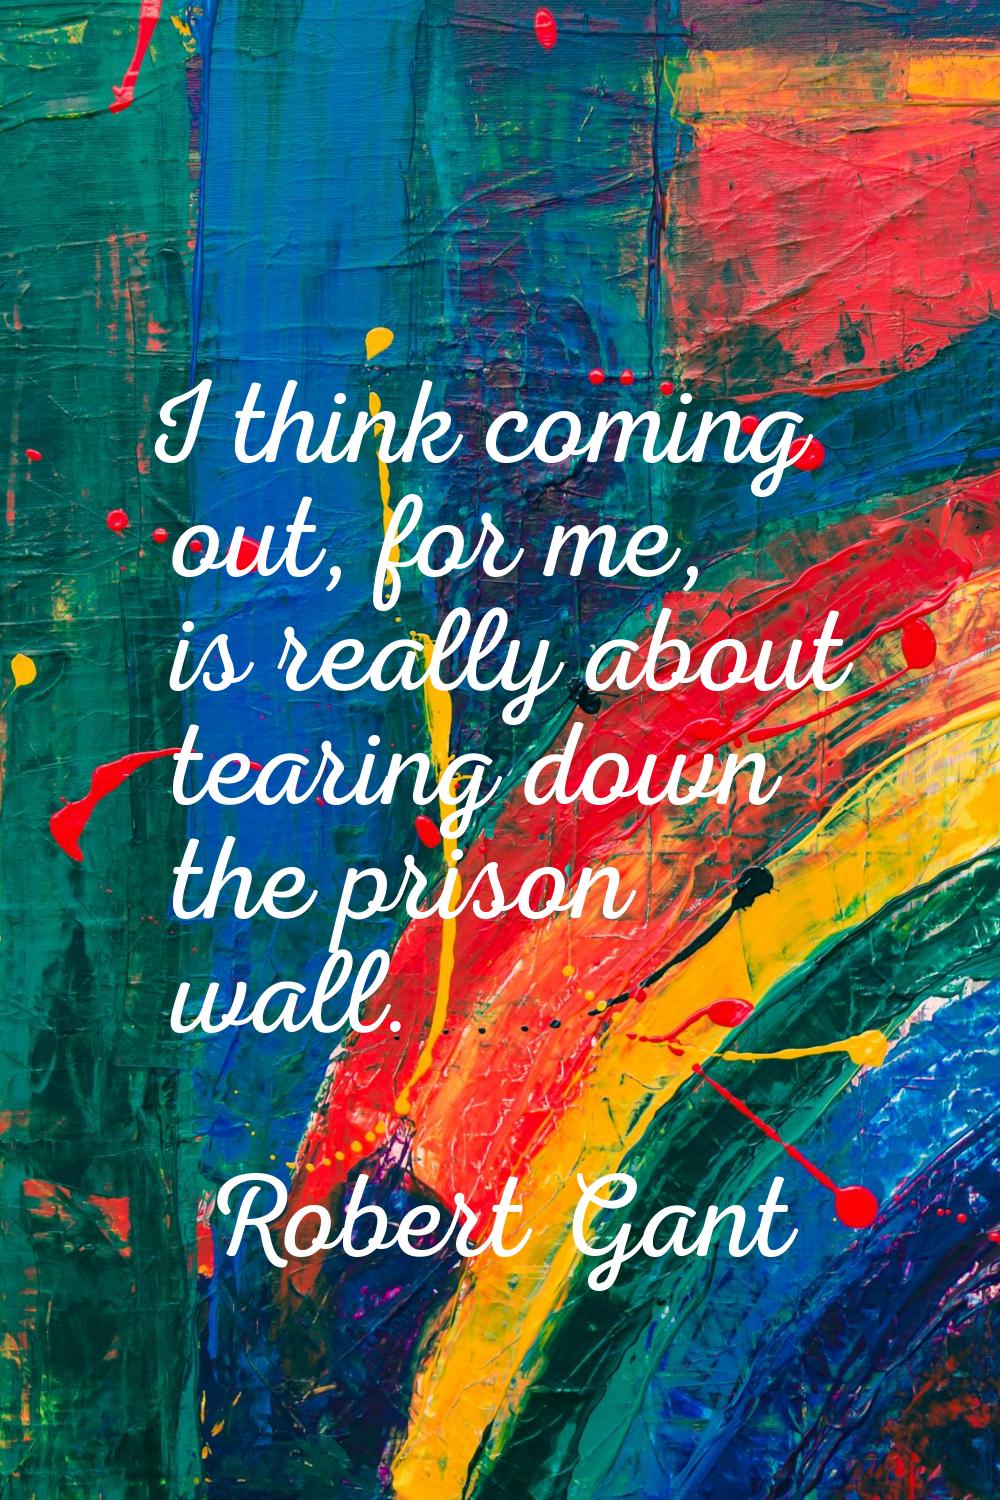 I think coming out, for me, is really about tearing down the prison wall.